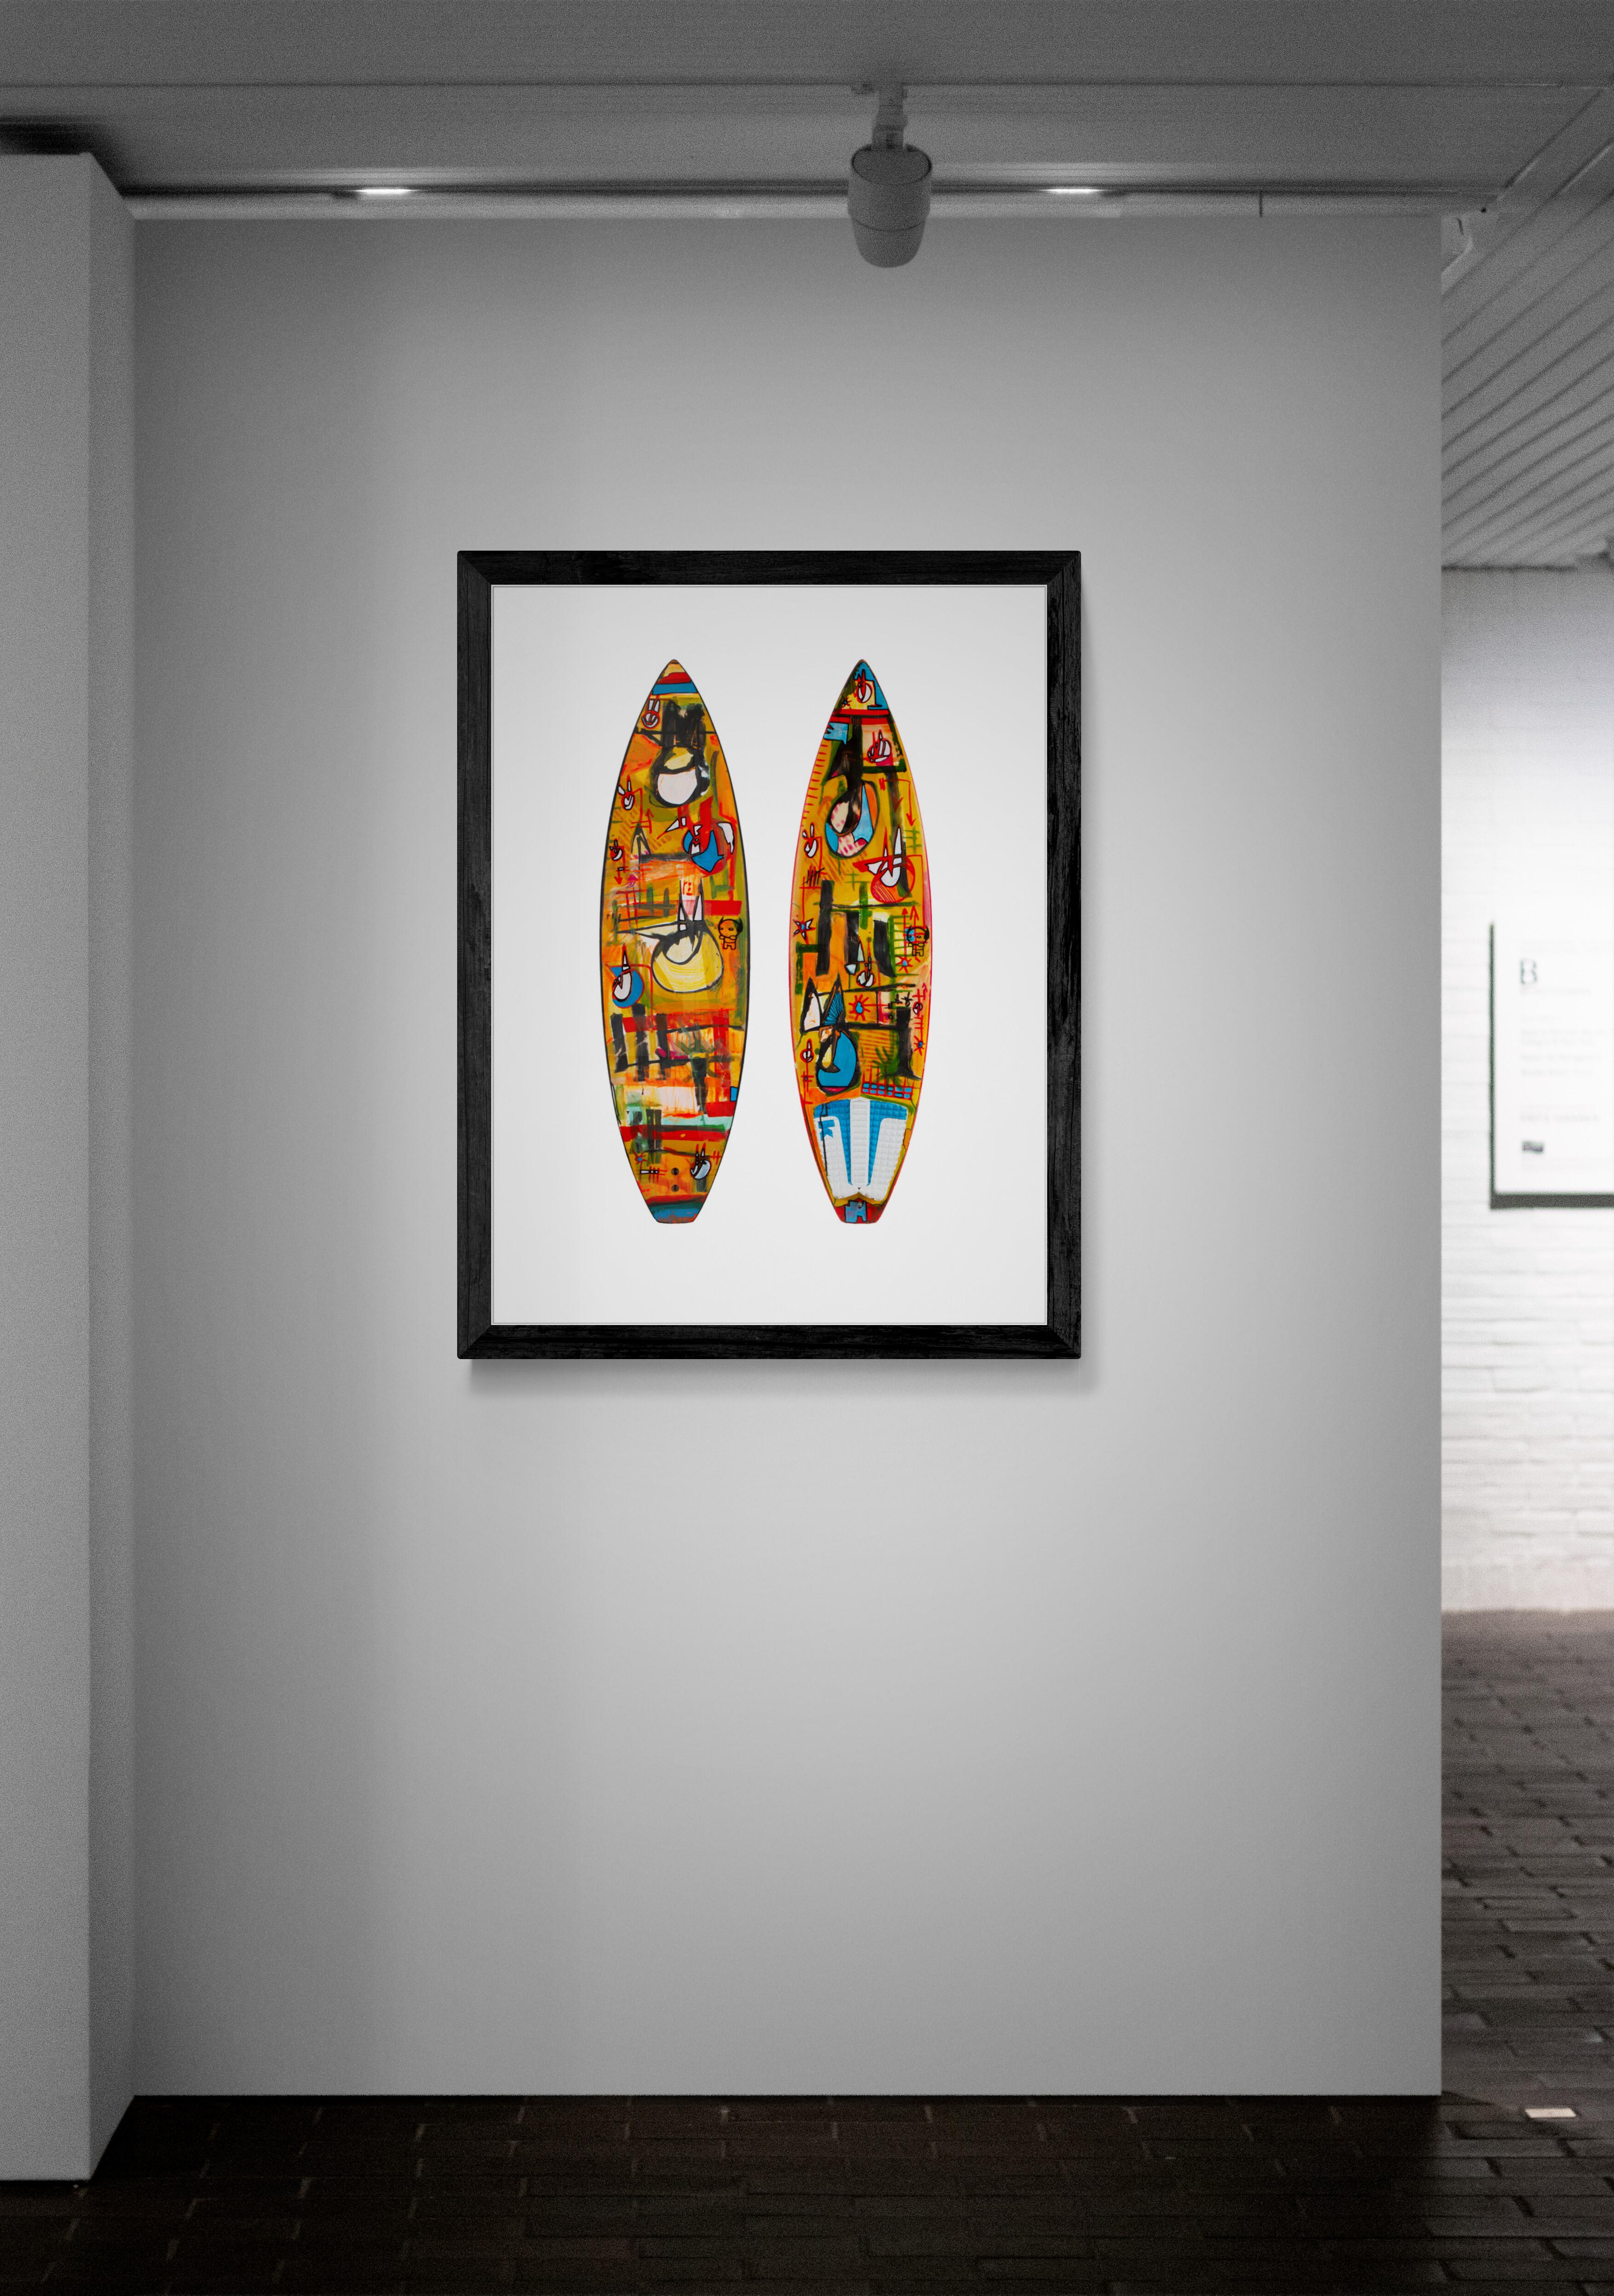 Artist: Michael Torquato deNicola

Title: Sun Down Surf Board Print

Edition Details: Archival pigment print on 100% Agave/Cotton sustainable fine art paper, signed and numbered in the margins by the artist, and released in the following exclusive